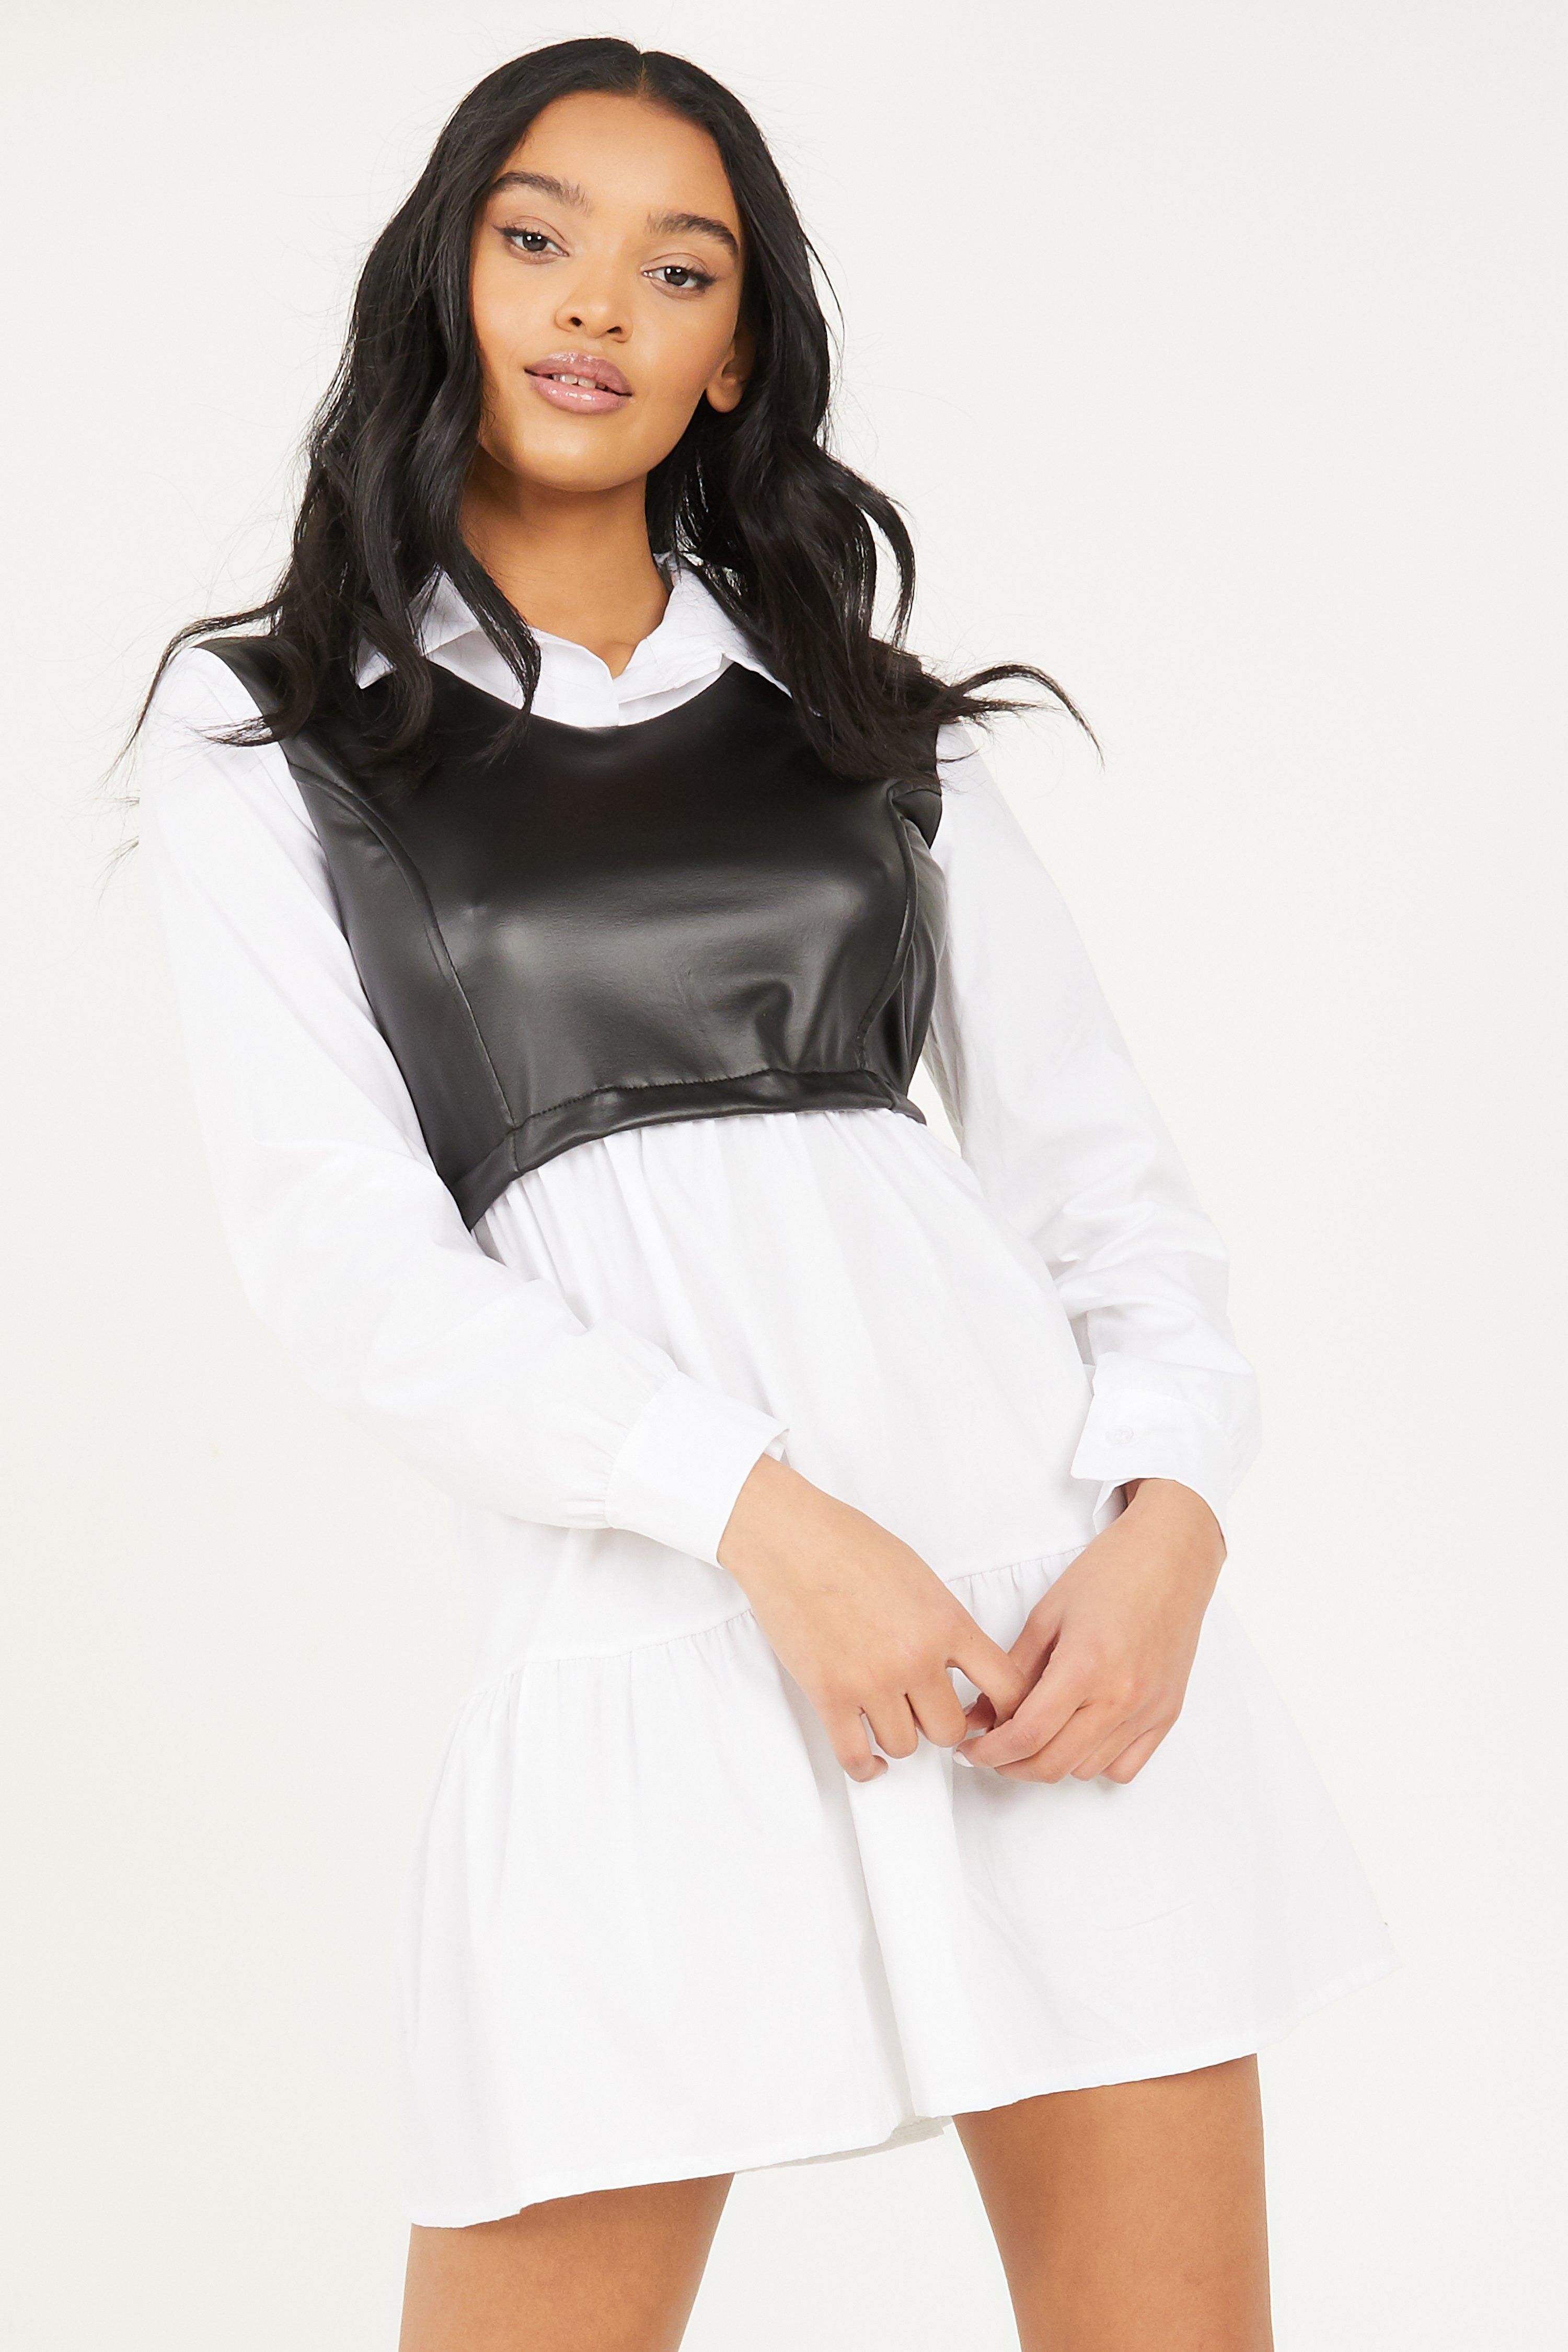 - Faux leather detail  - Shirt dress  - Long sleeve  - Tiered skirt   - 2 in 1 style  - Length: 90cm approx  - Model Height: 5' 8